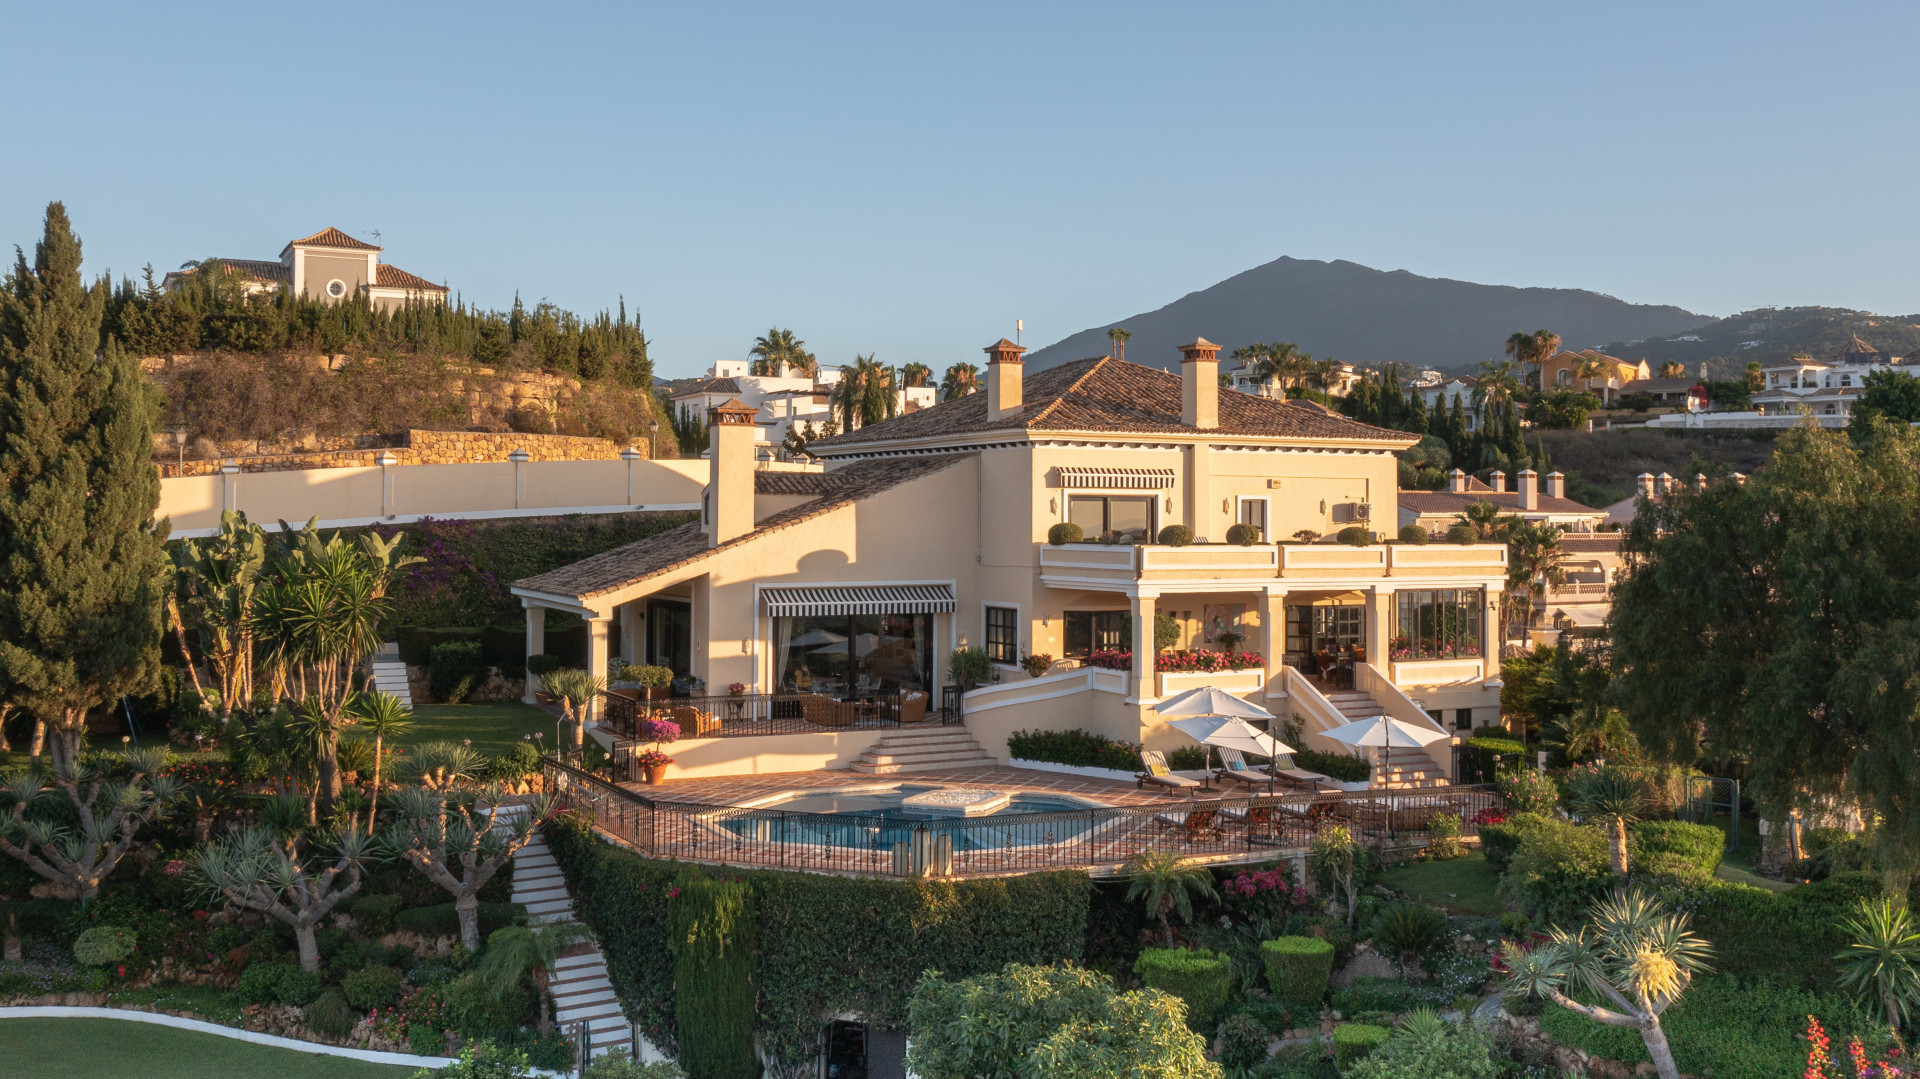 Magnificent 6 bedroom Andalusian style mansion situated in a gated community, Benahavis